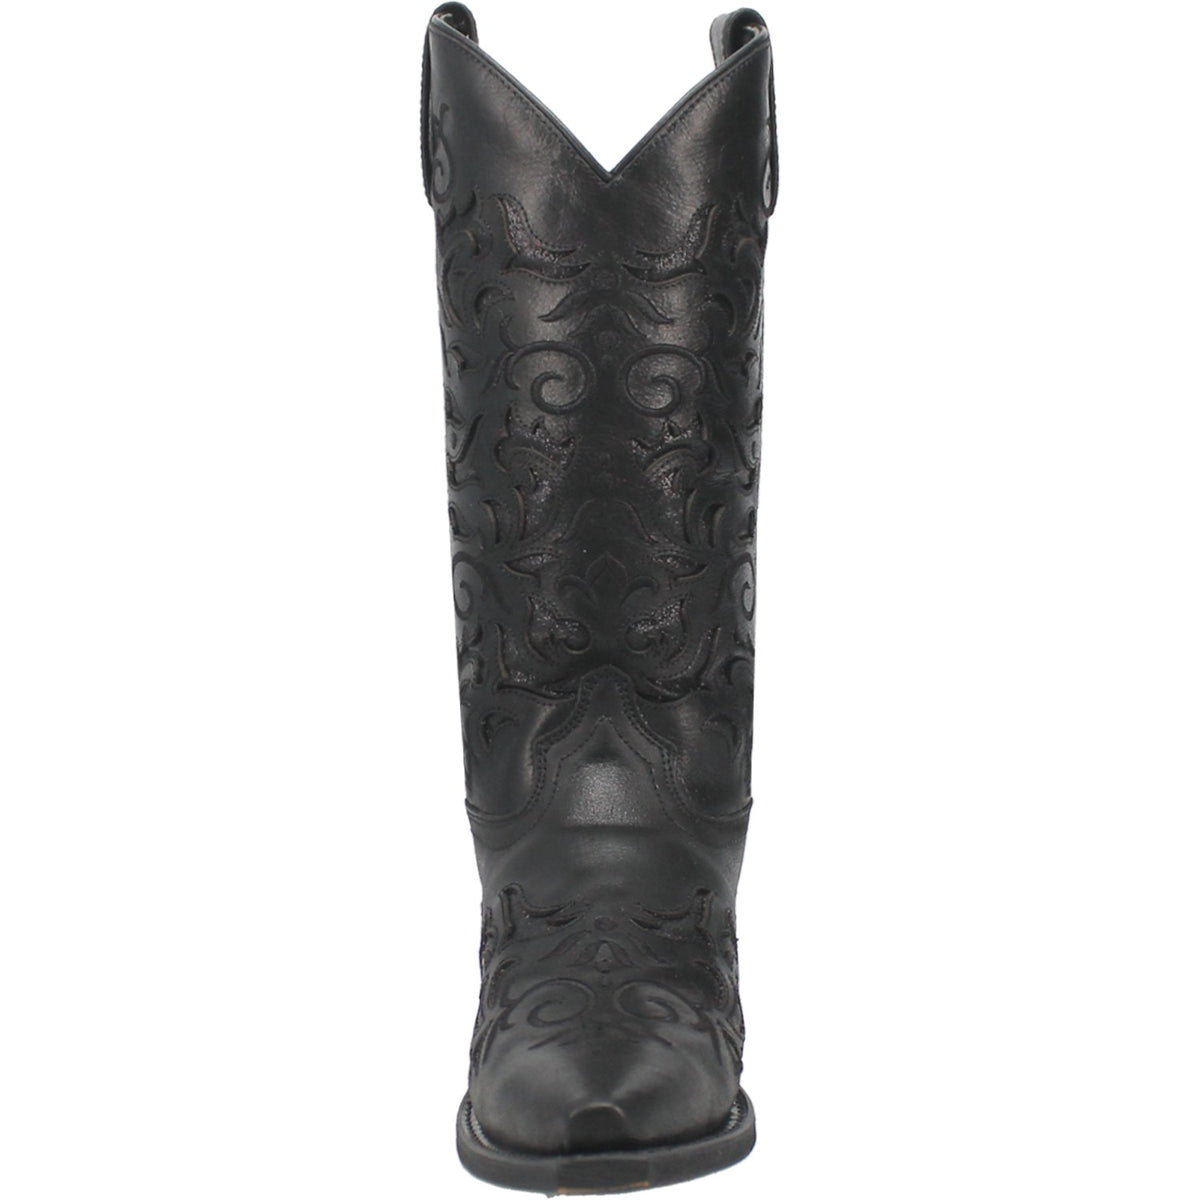 NIGHT SKY LEATHER BOOT Cover